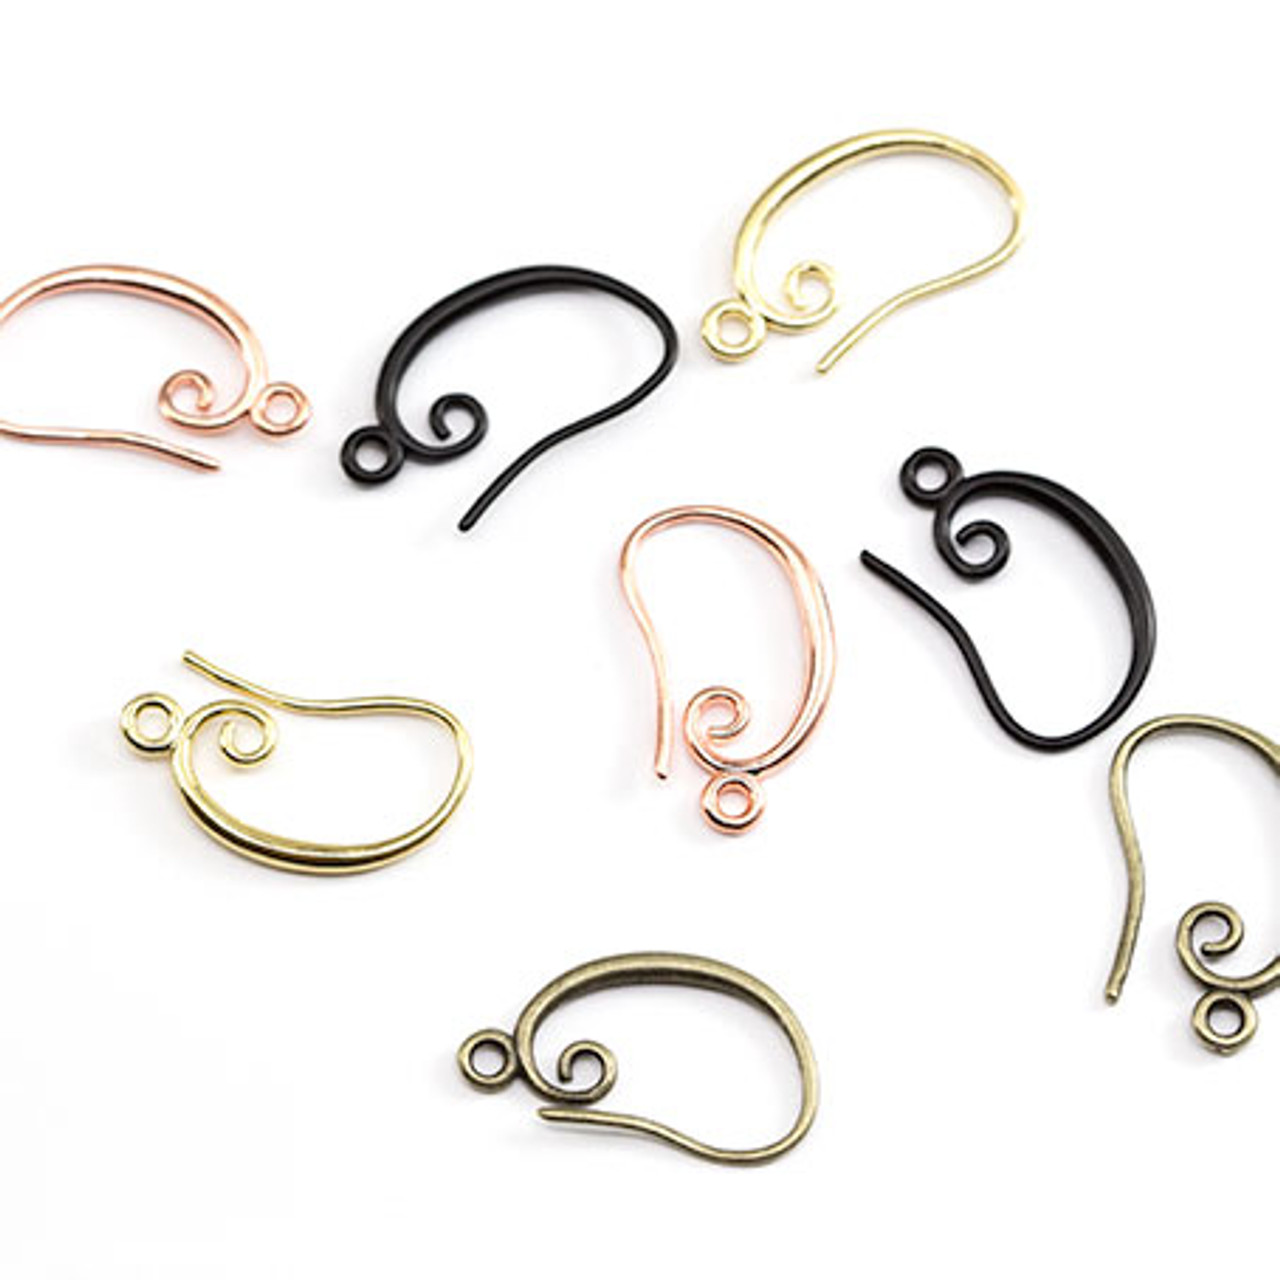 Limerencia Nickel Free Titanium French Hooks Earring Findings, Earring  Making Kit Includes 10pcs French Earring Hooks Ear Wire and 20pcs Earring  Backs